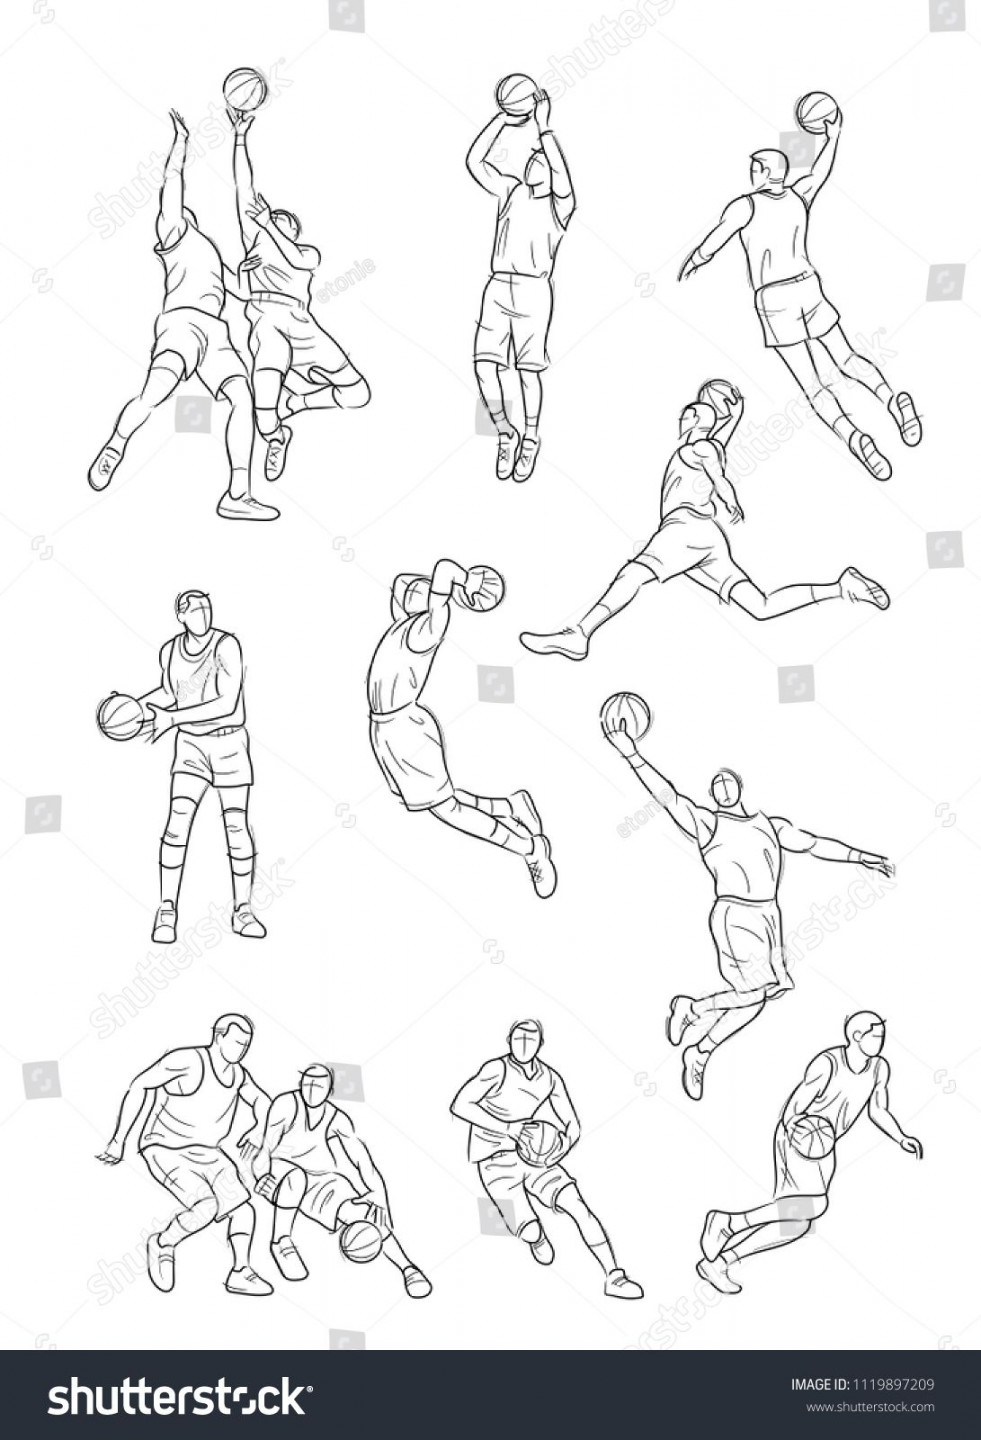 Vector set of Basketball players, sketch and drawing #Ad